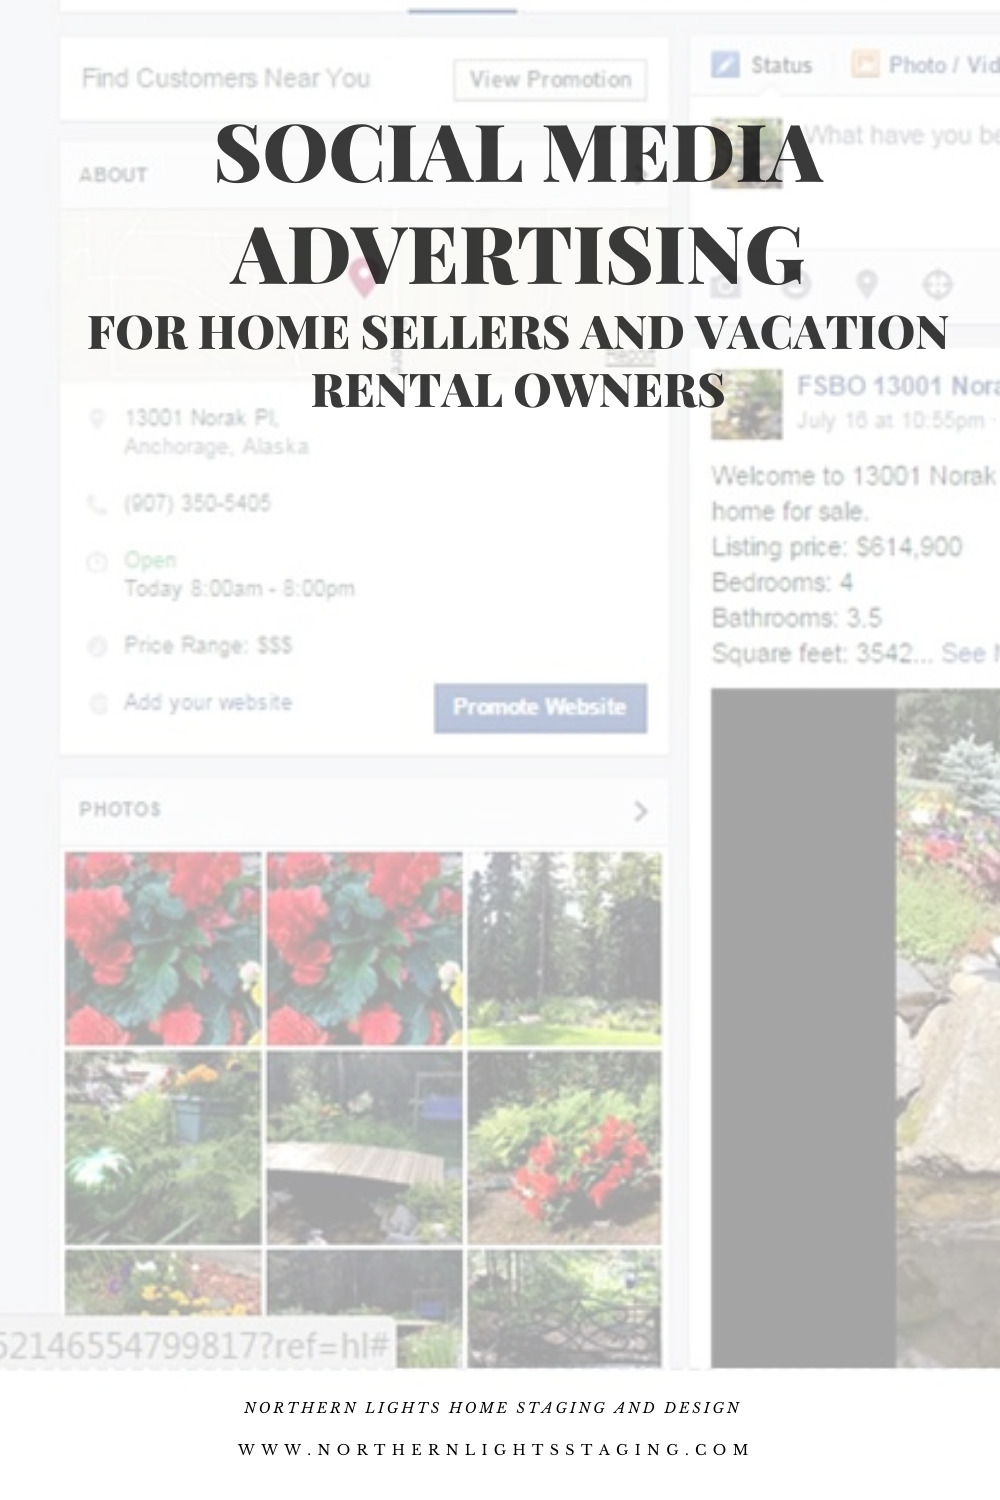 Social Media Advertising for Home Sellers and Vacation Rental Owners